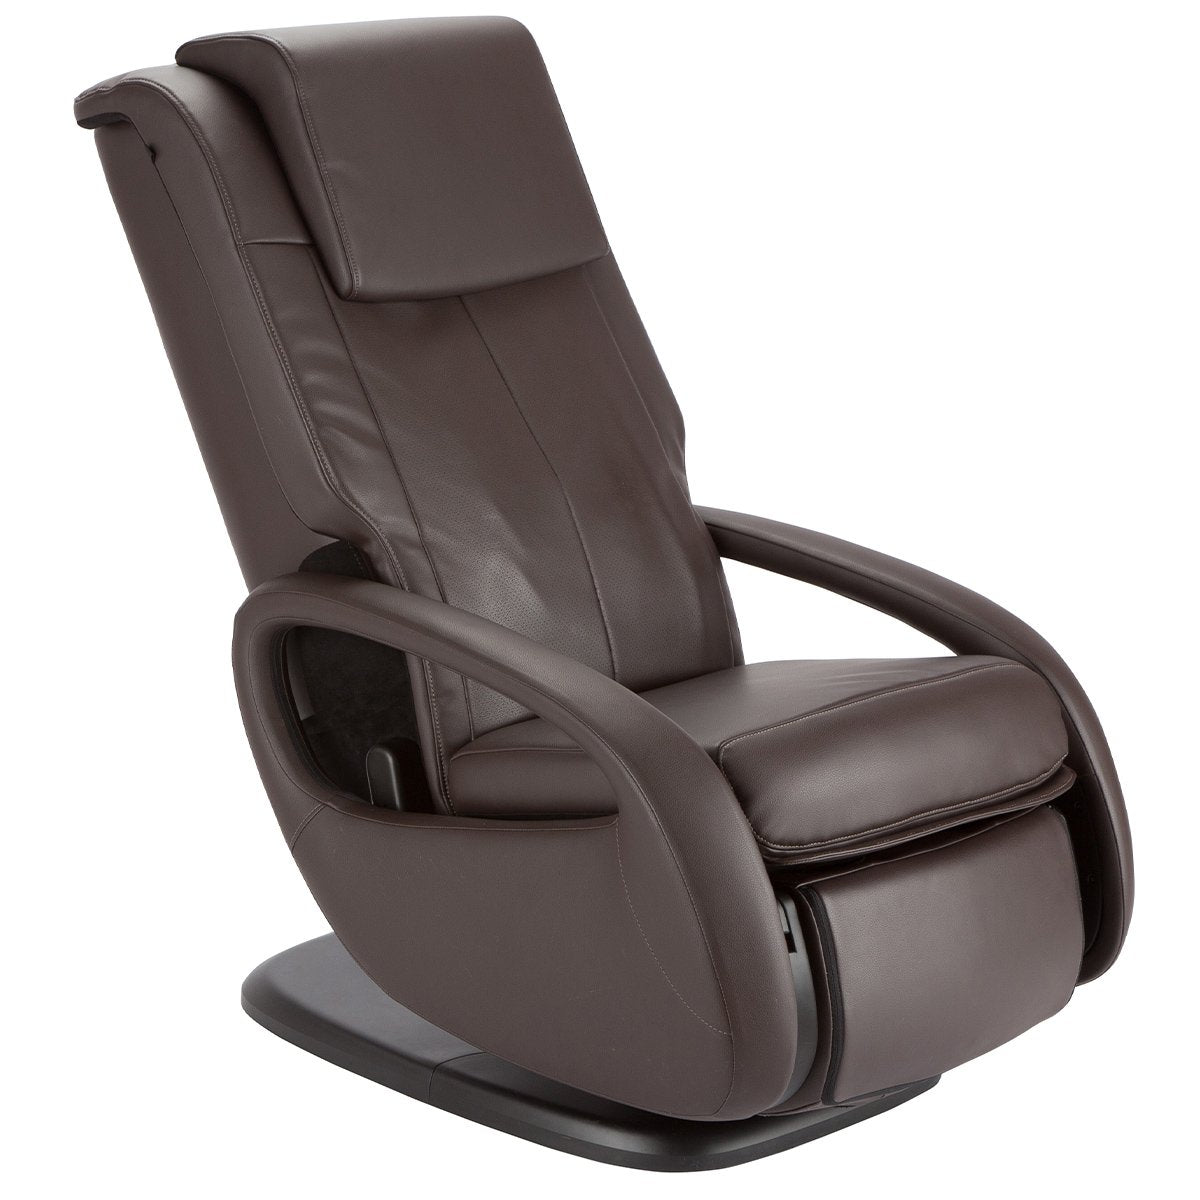 Human Touch WholeBody 7.1 Massage Chair Massage Chair Human Touch Espresso Standard (Free) 